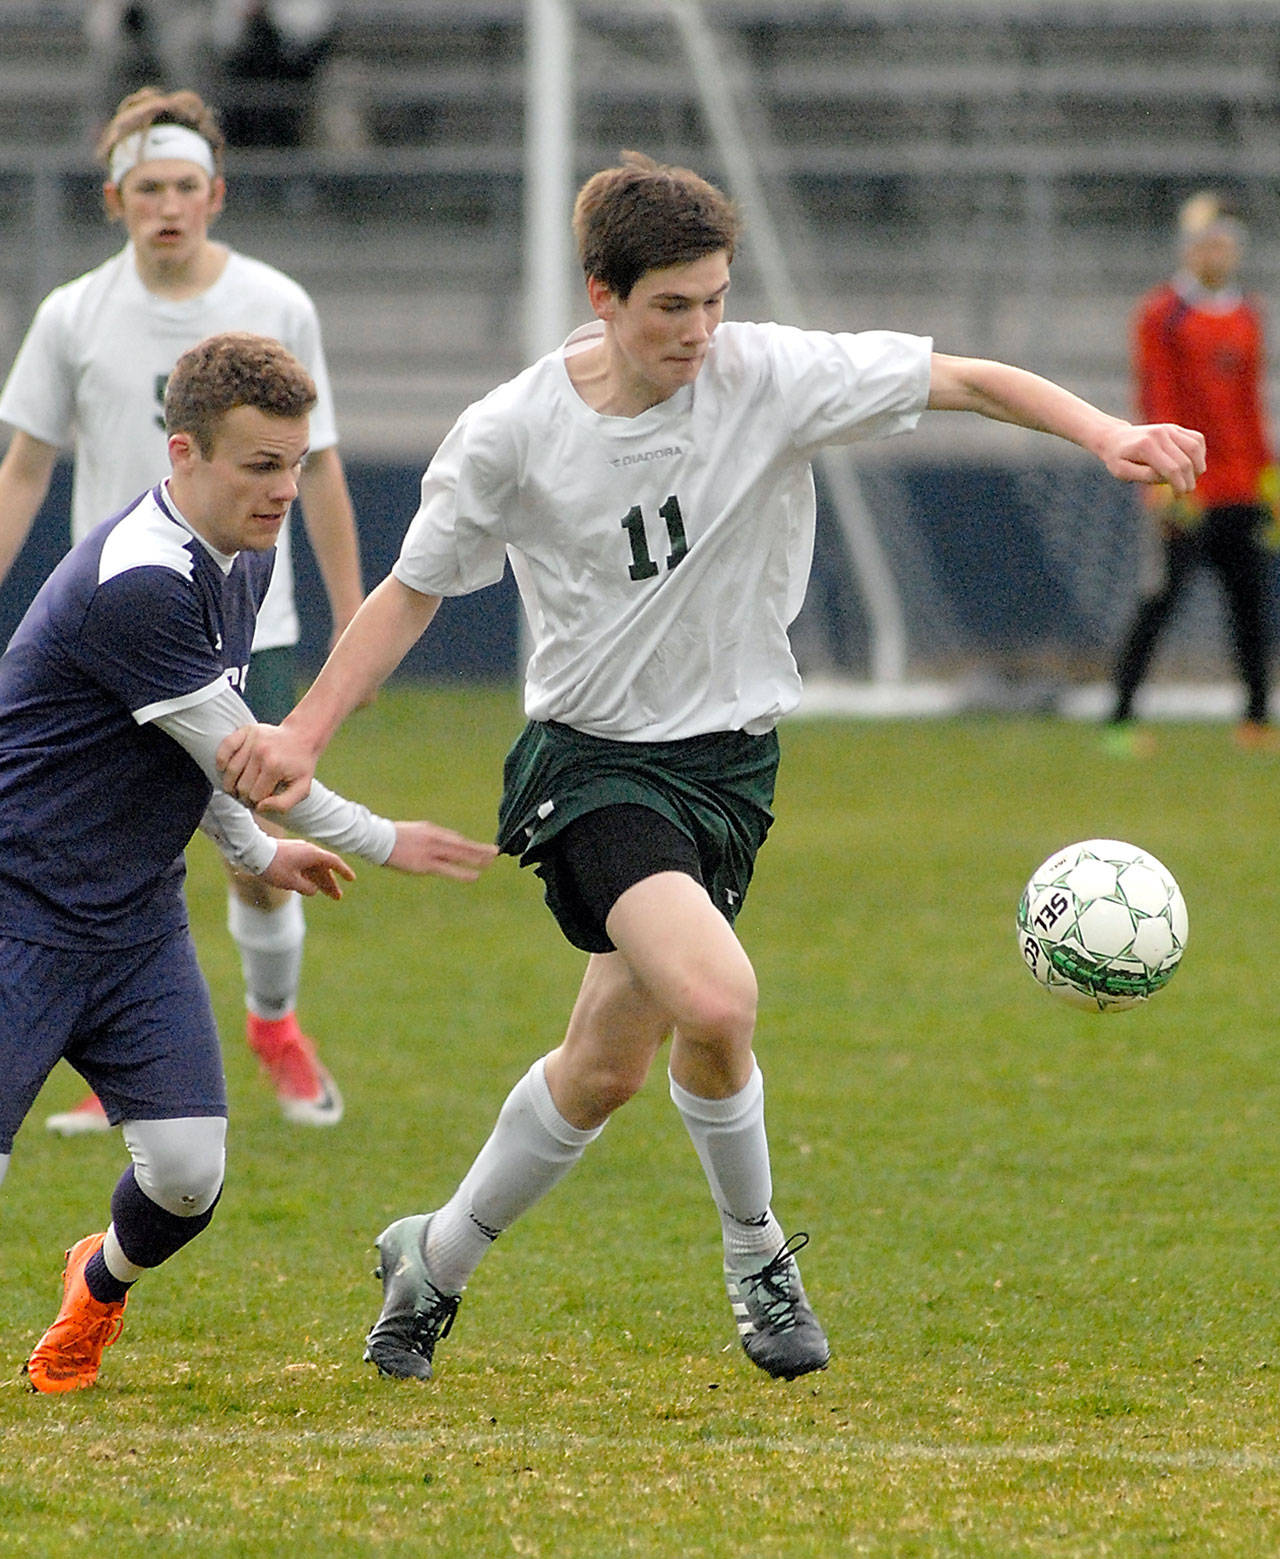 Keith Thorpe/Peninsula Daily News Port Angeles’ Gabriel Long, right, chases down the ball with North Kitsap’s George Beddoe in pursuit during Thursday night’s match at Port Angeles Civic Field. In the background is Port Angeles’ Hollund Bailey.